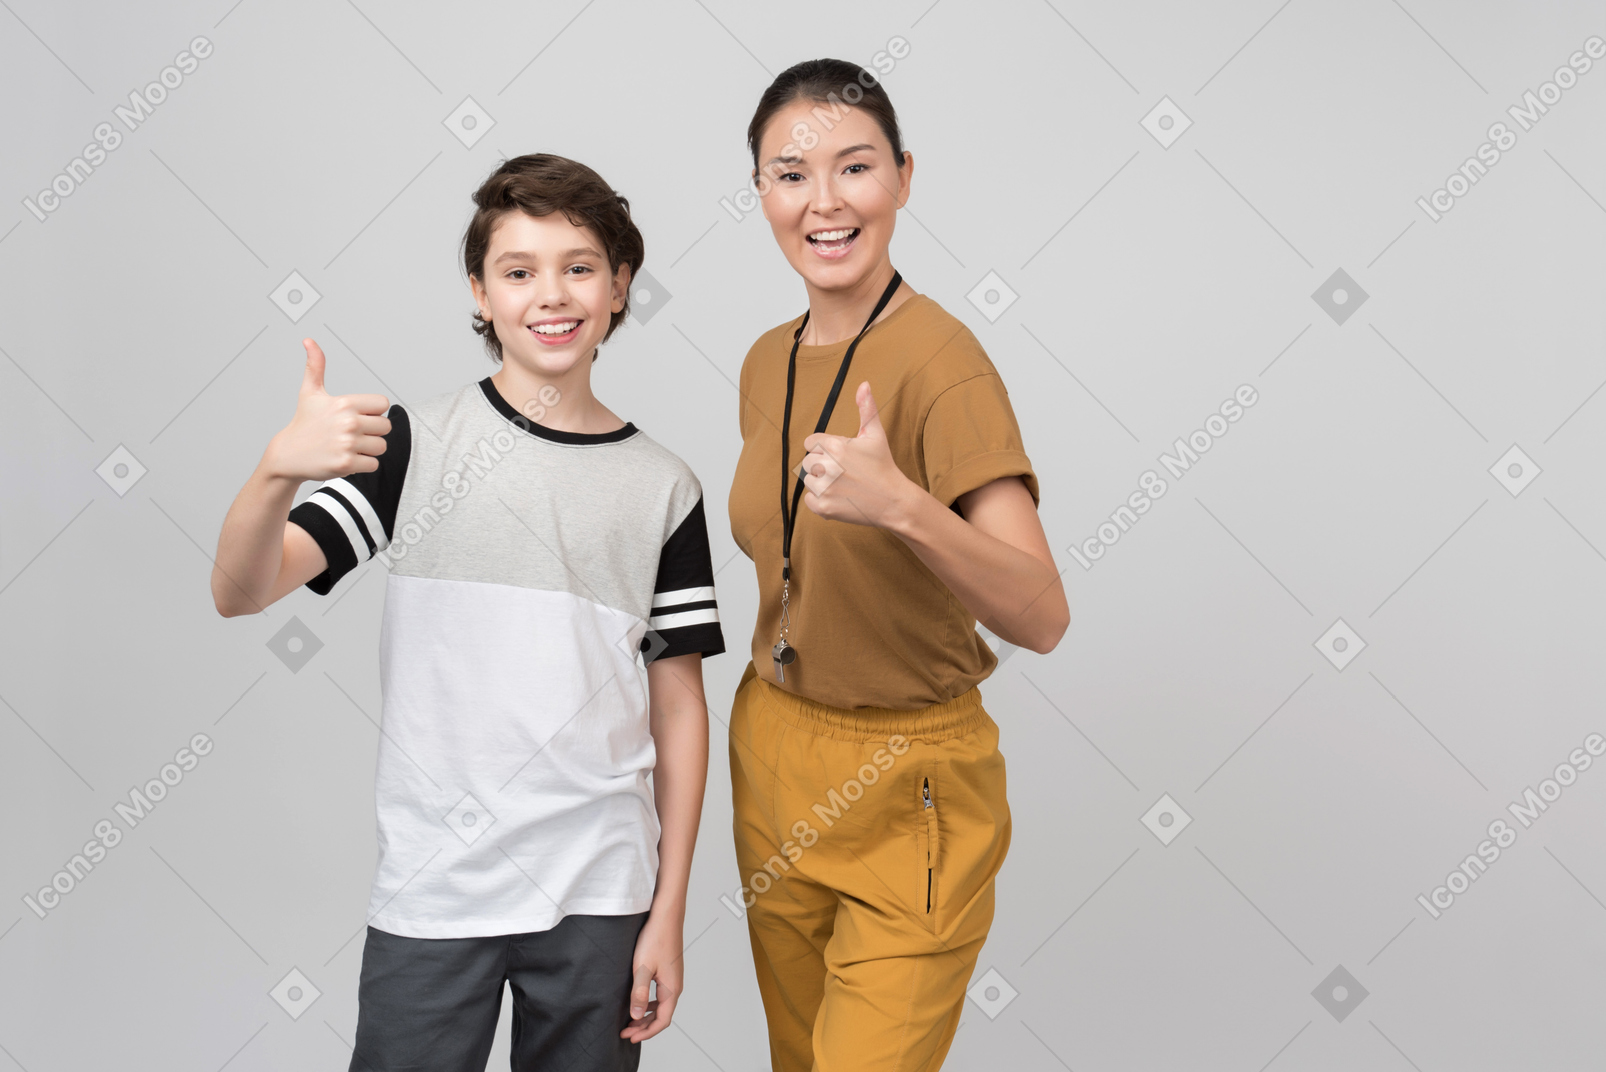 Pe female teacher and pupil smiling and showing thumbs up